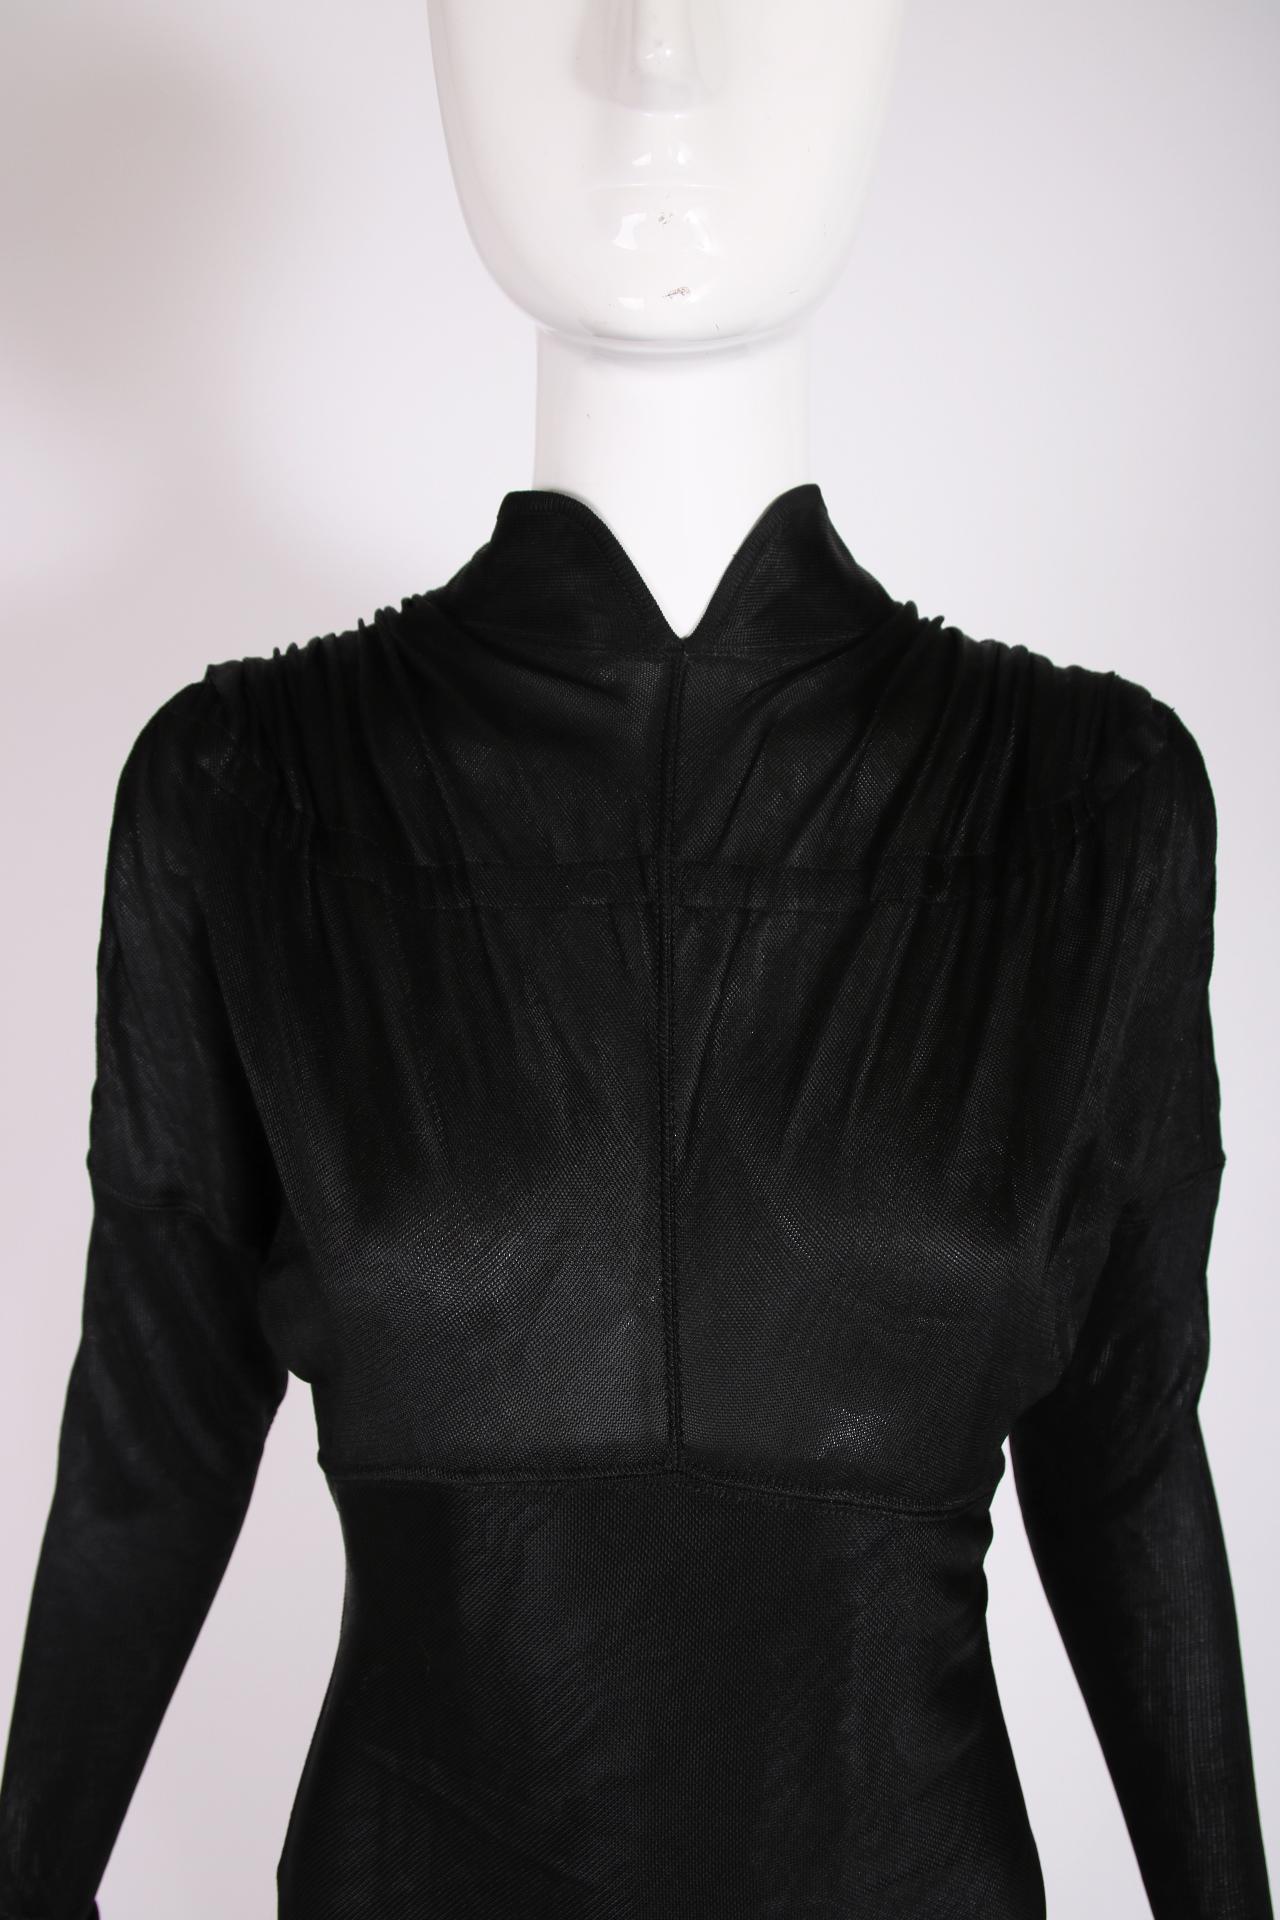 Iconic Azzedine Alaia Black Bodycon Trained Gown, 1986 In Excellent Condition For Sale In Studio City, CA